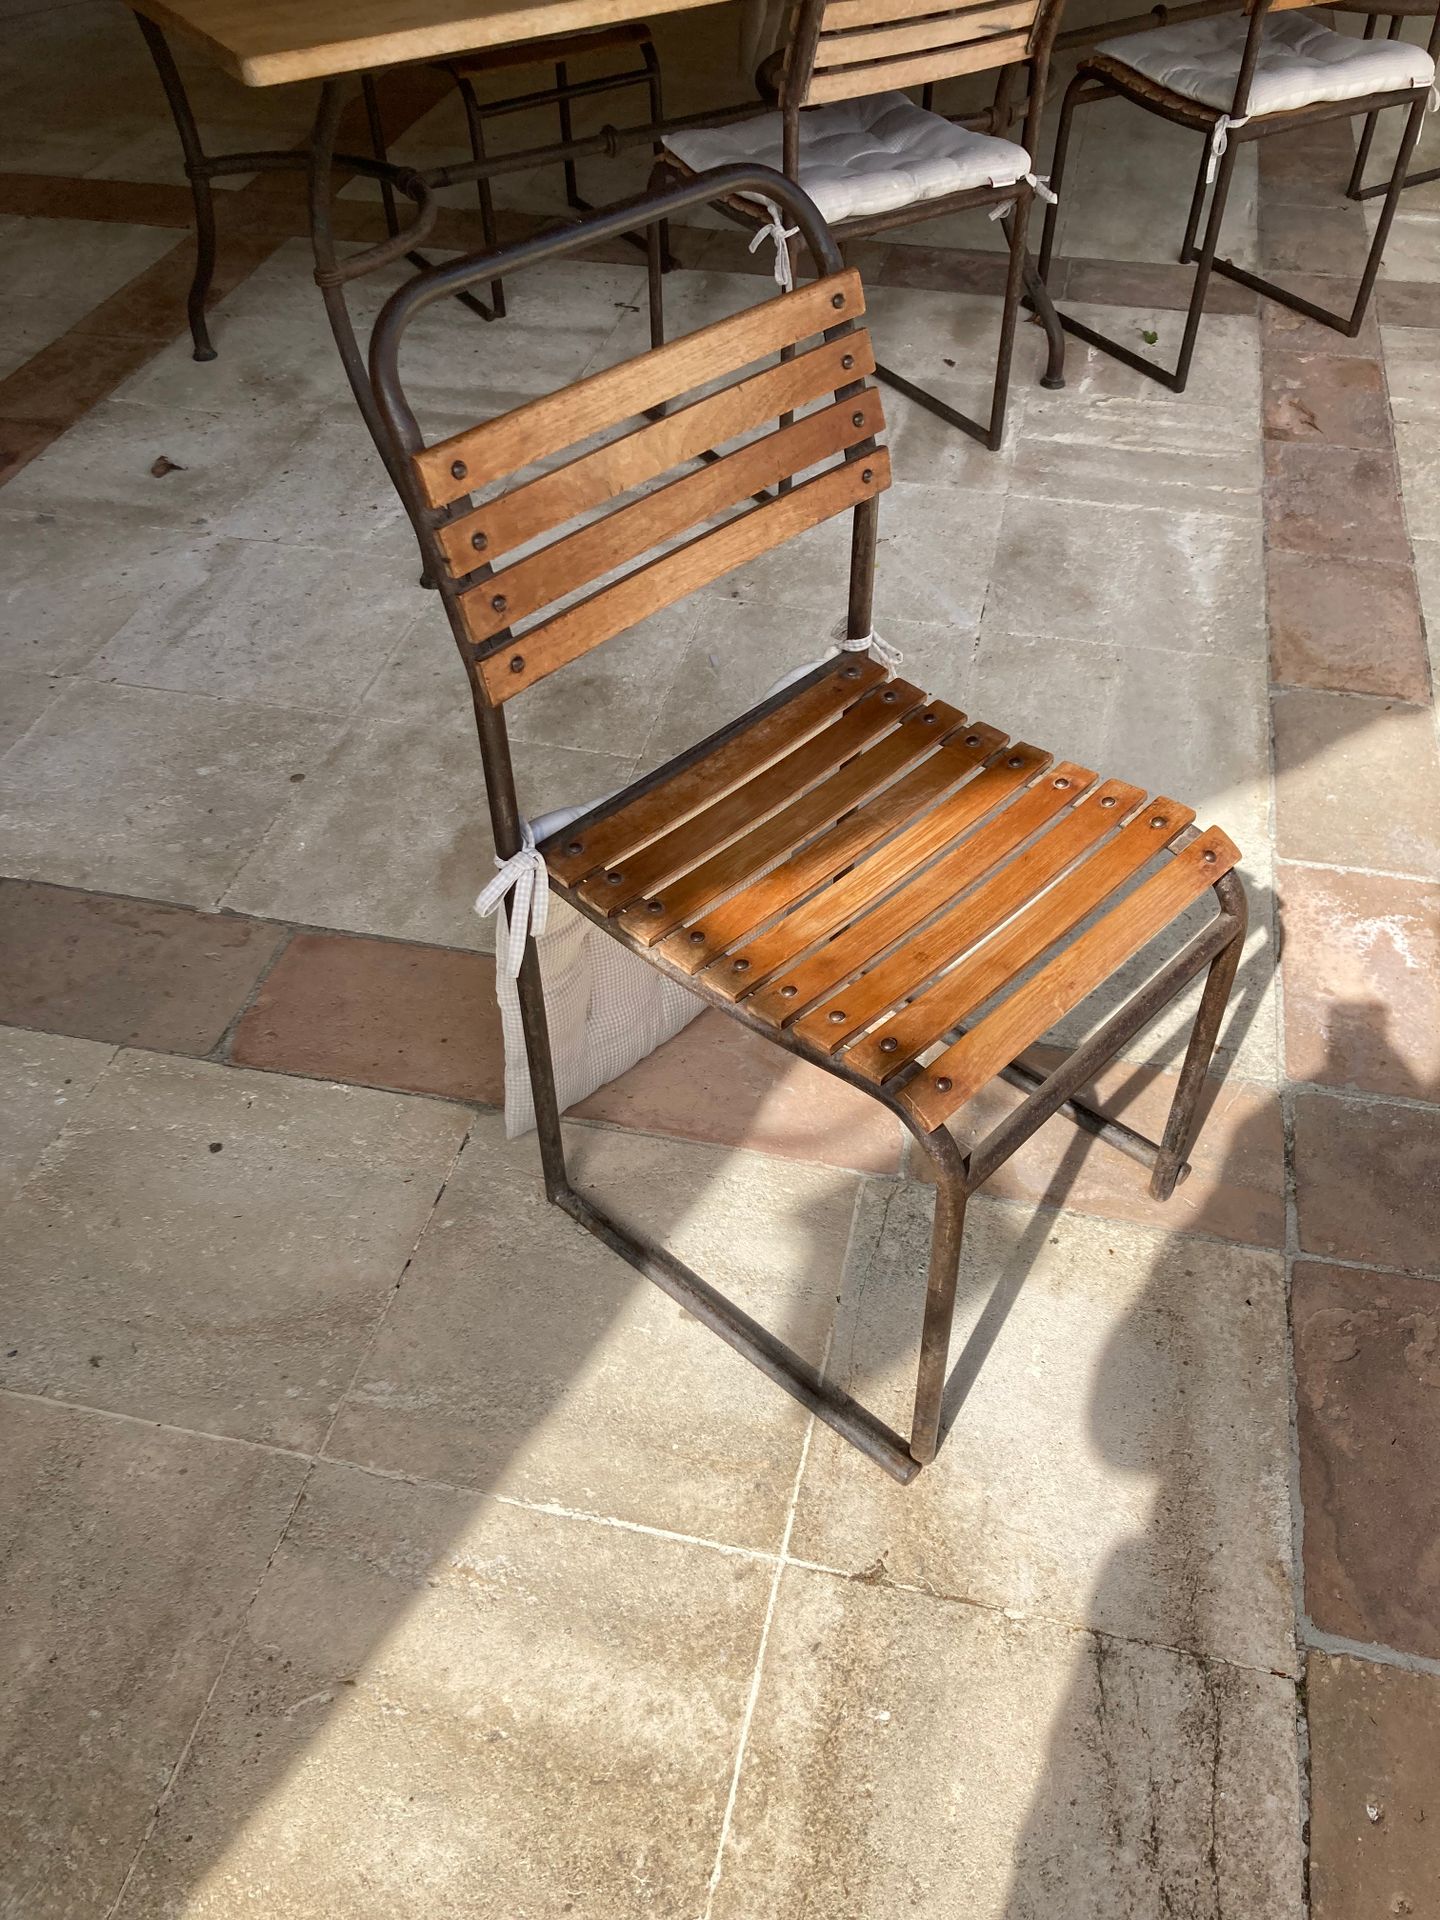 Null Suite of twelve steel and wood chairs 
H. 85 L. 42 cm